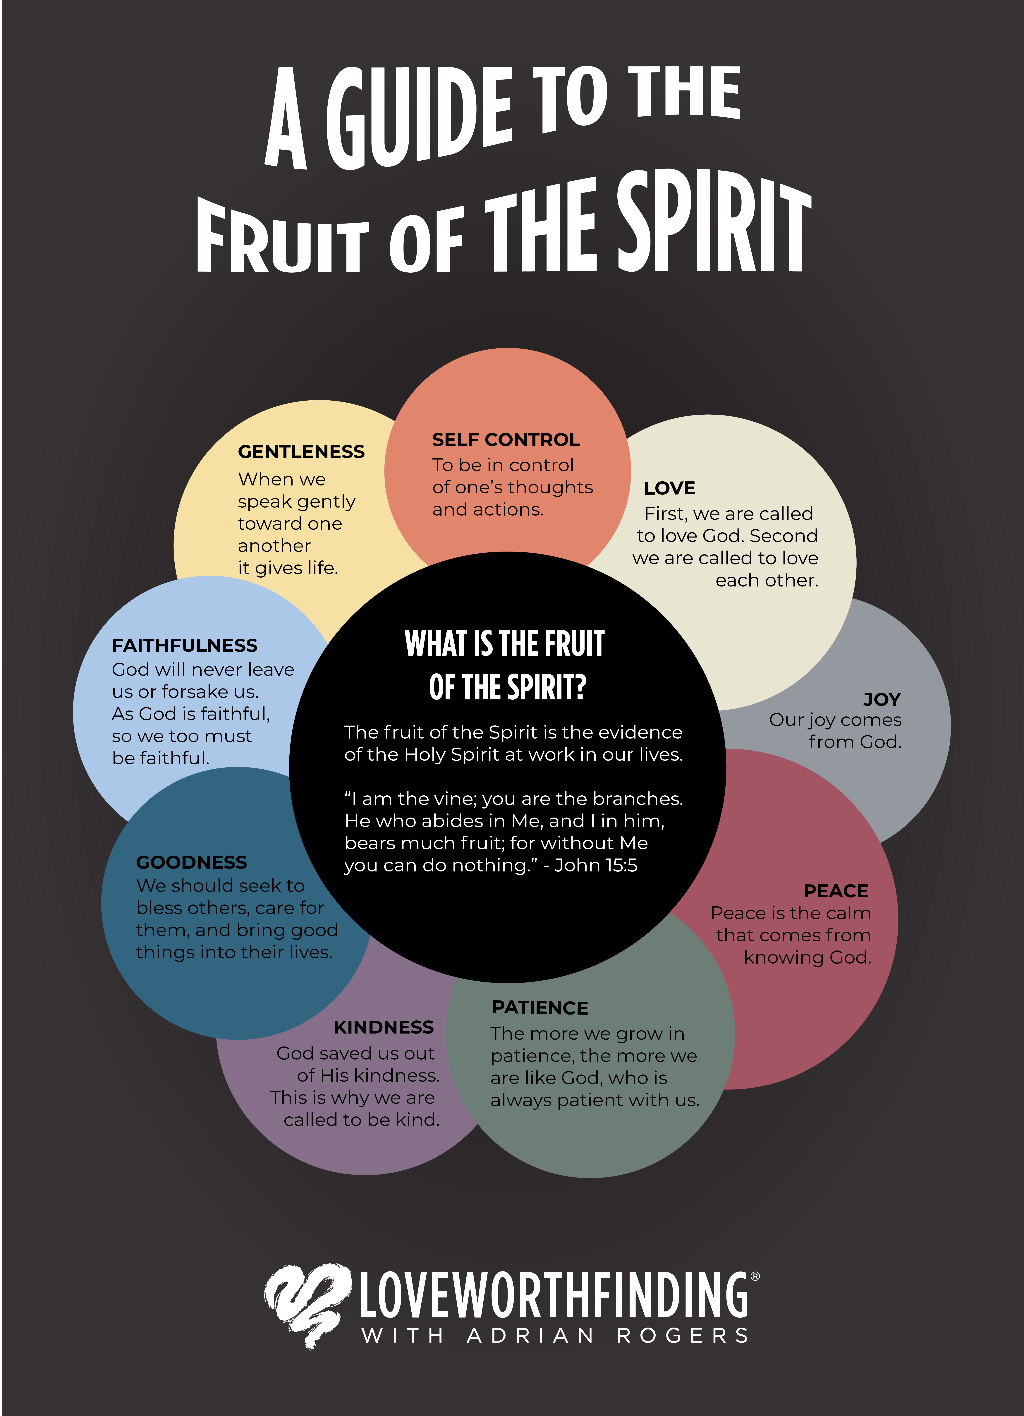 The Fruit of the Spirit: How the Spirit Works in and Through Believers